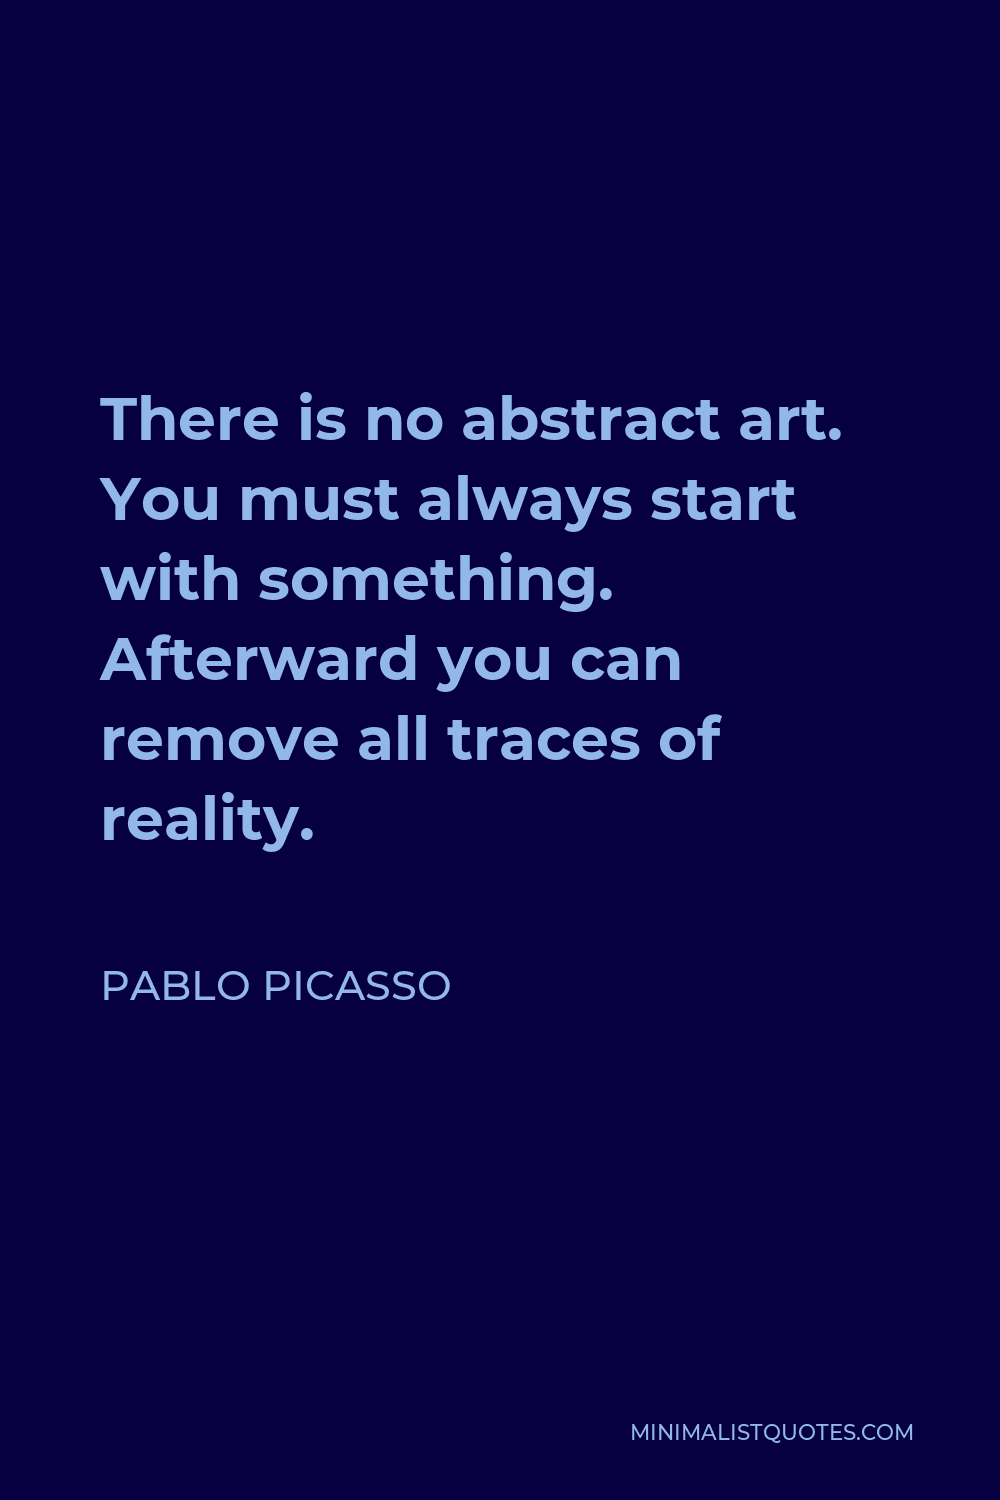 Pablo Picasso Quote - There is no abstract art. You must always start with something. Afterward you can remove all traces of reality.